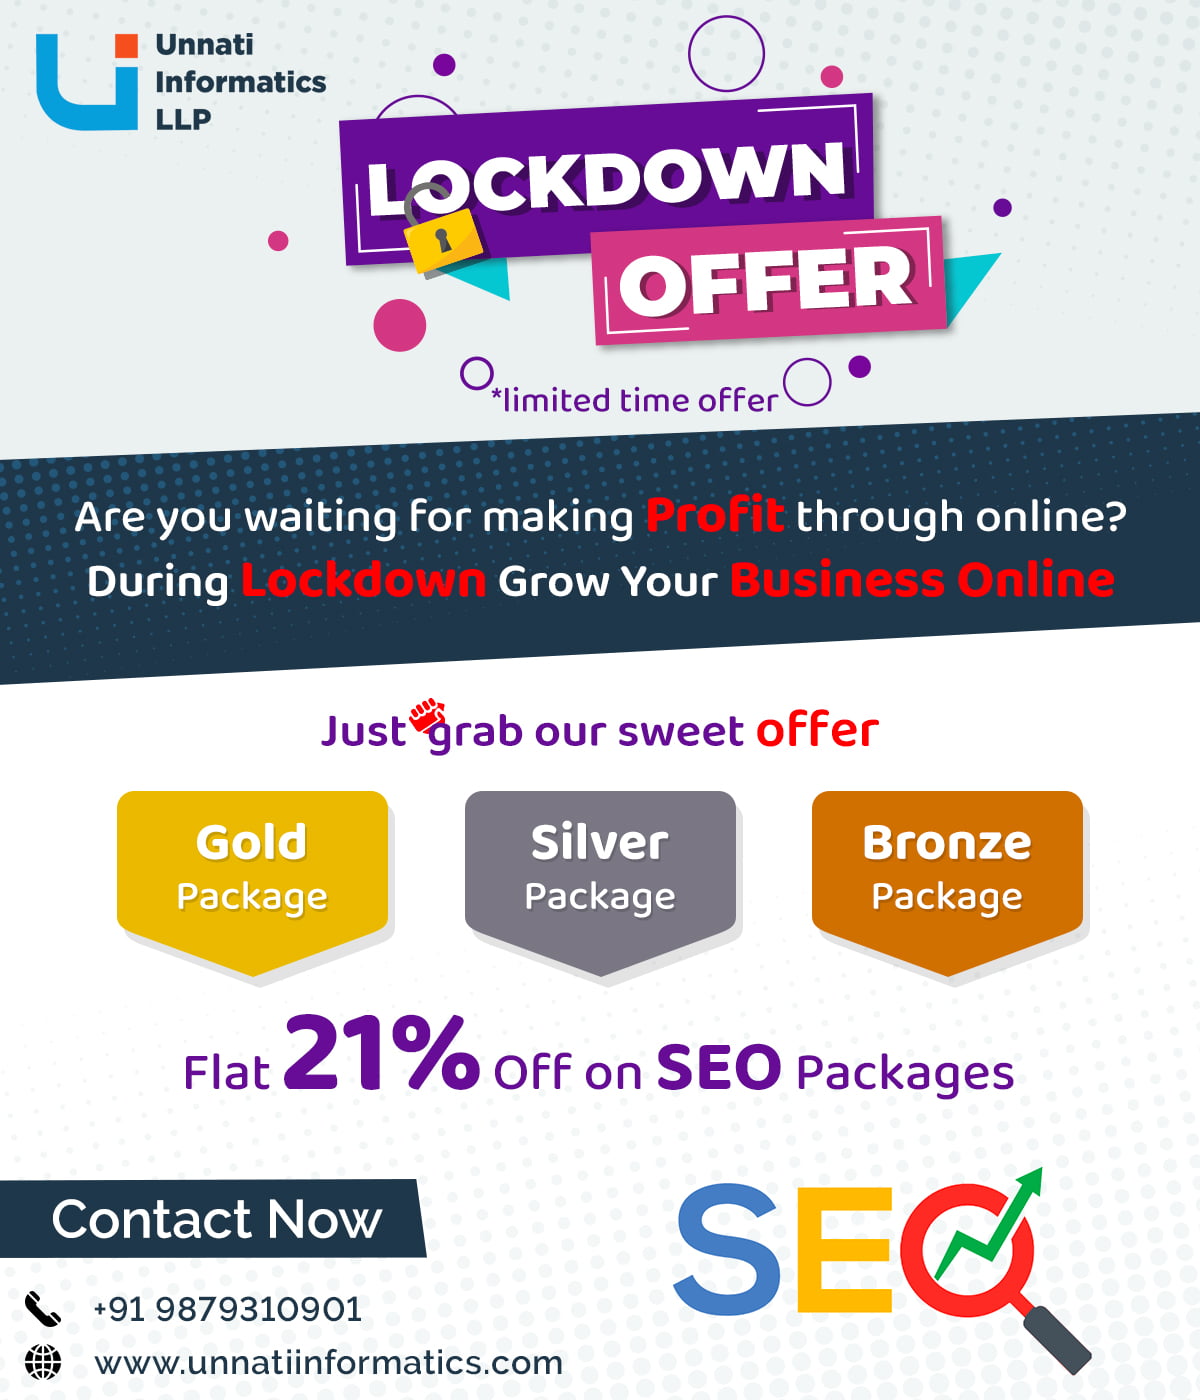 COVID-19 Lockdown Offer on Affordable SEO Packages